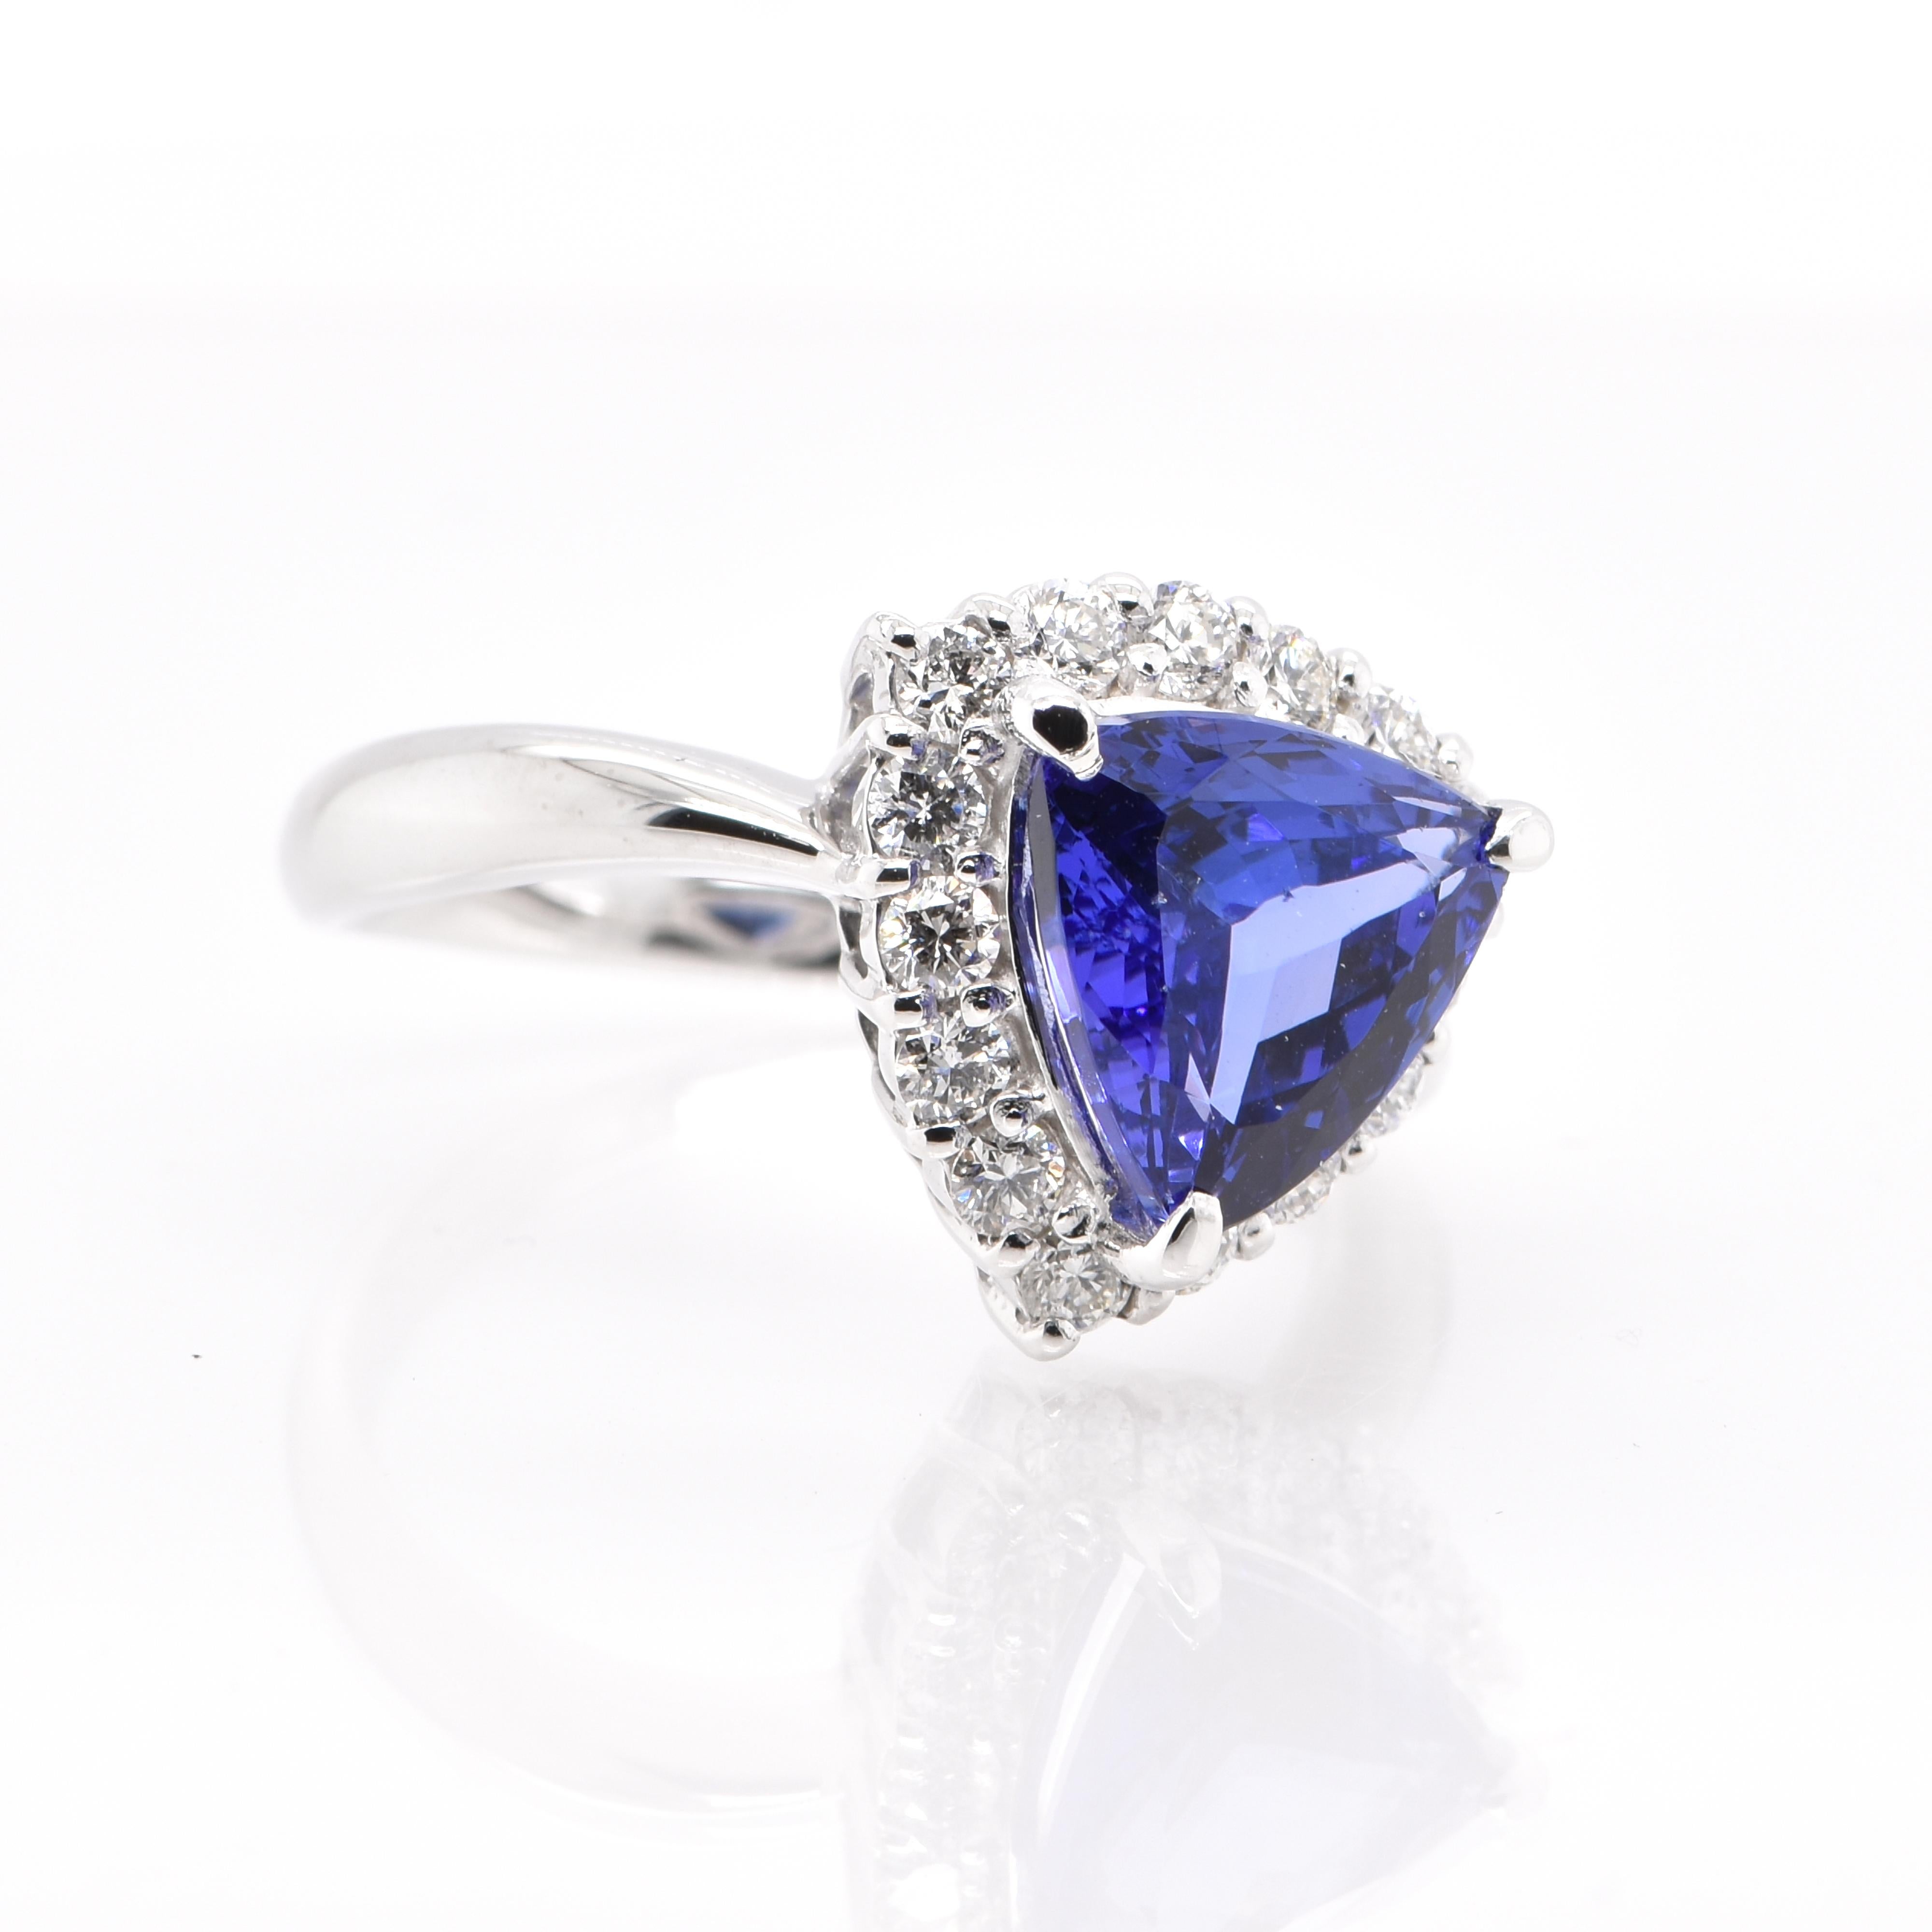 A beautiful Halo Ring featuring a 2.64 Carat, Natural, Trillion-Cut Tanzanite and 0.53 Carats of Diamond Accents set in Platinum. Tanzanite's name was given by Tiffany and Co after its only known source: Tanzania. Tanzanite displays beautiful